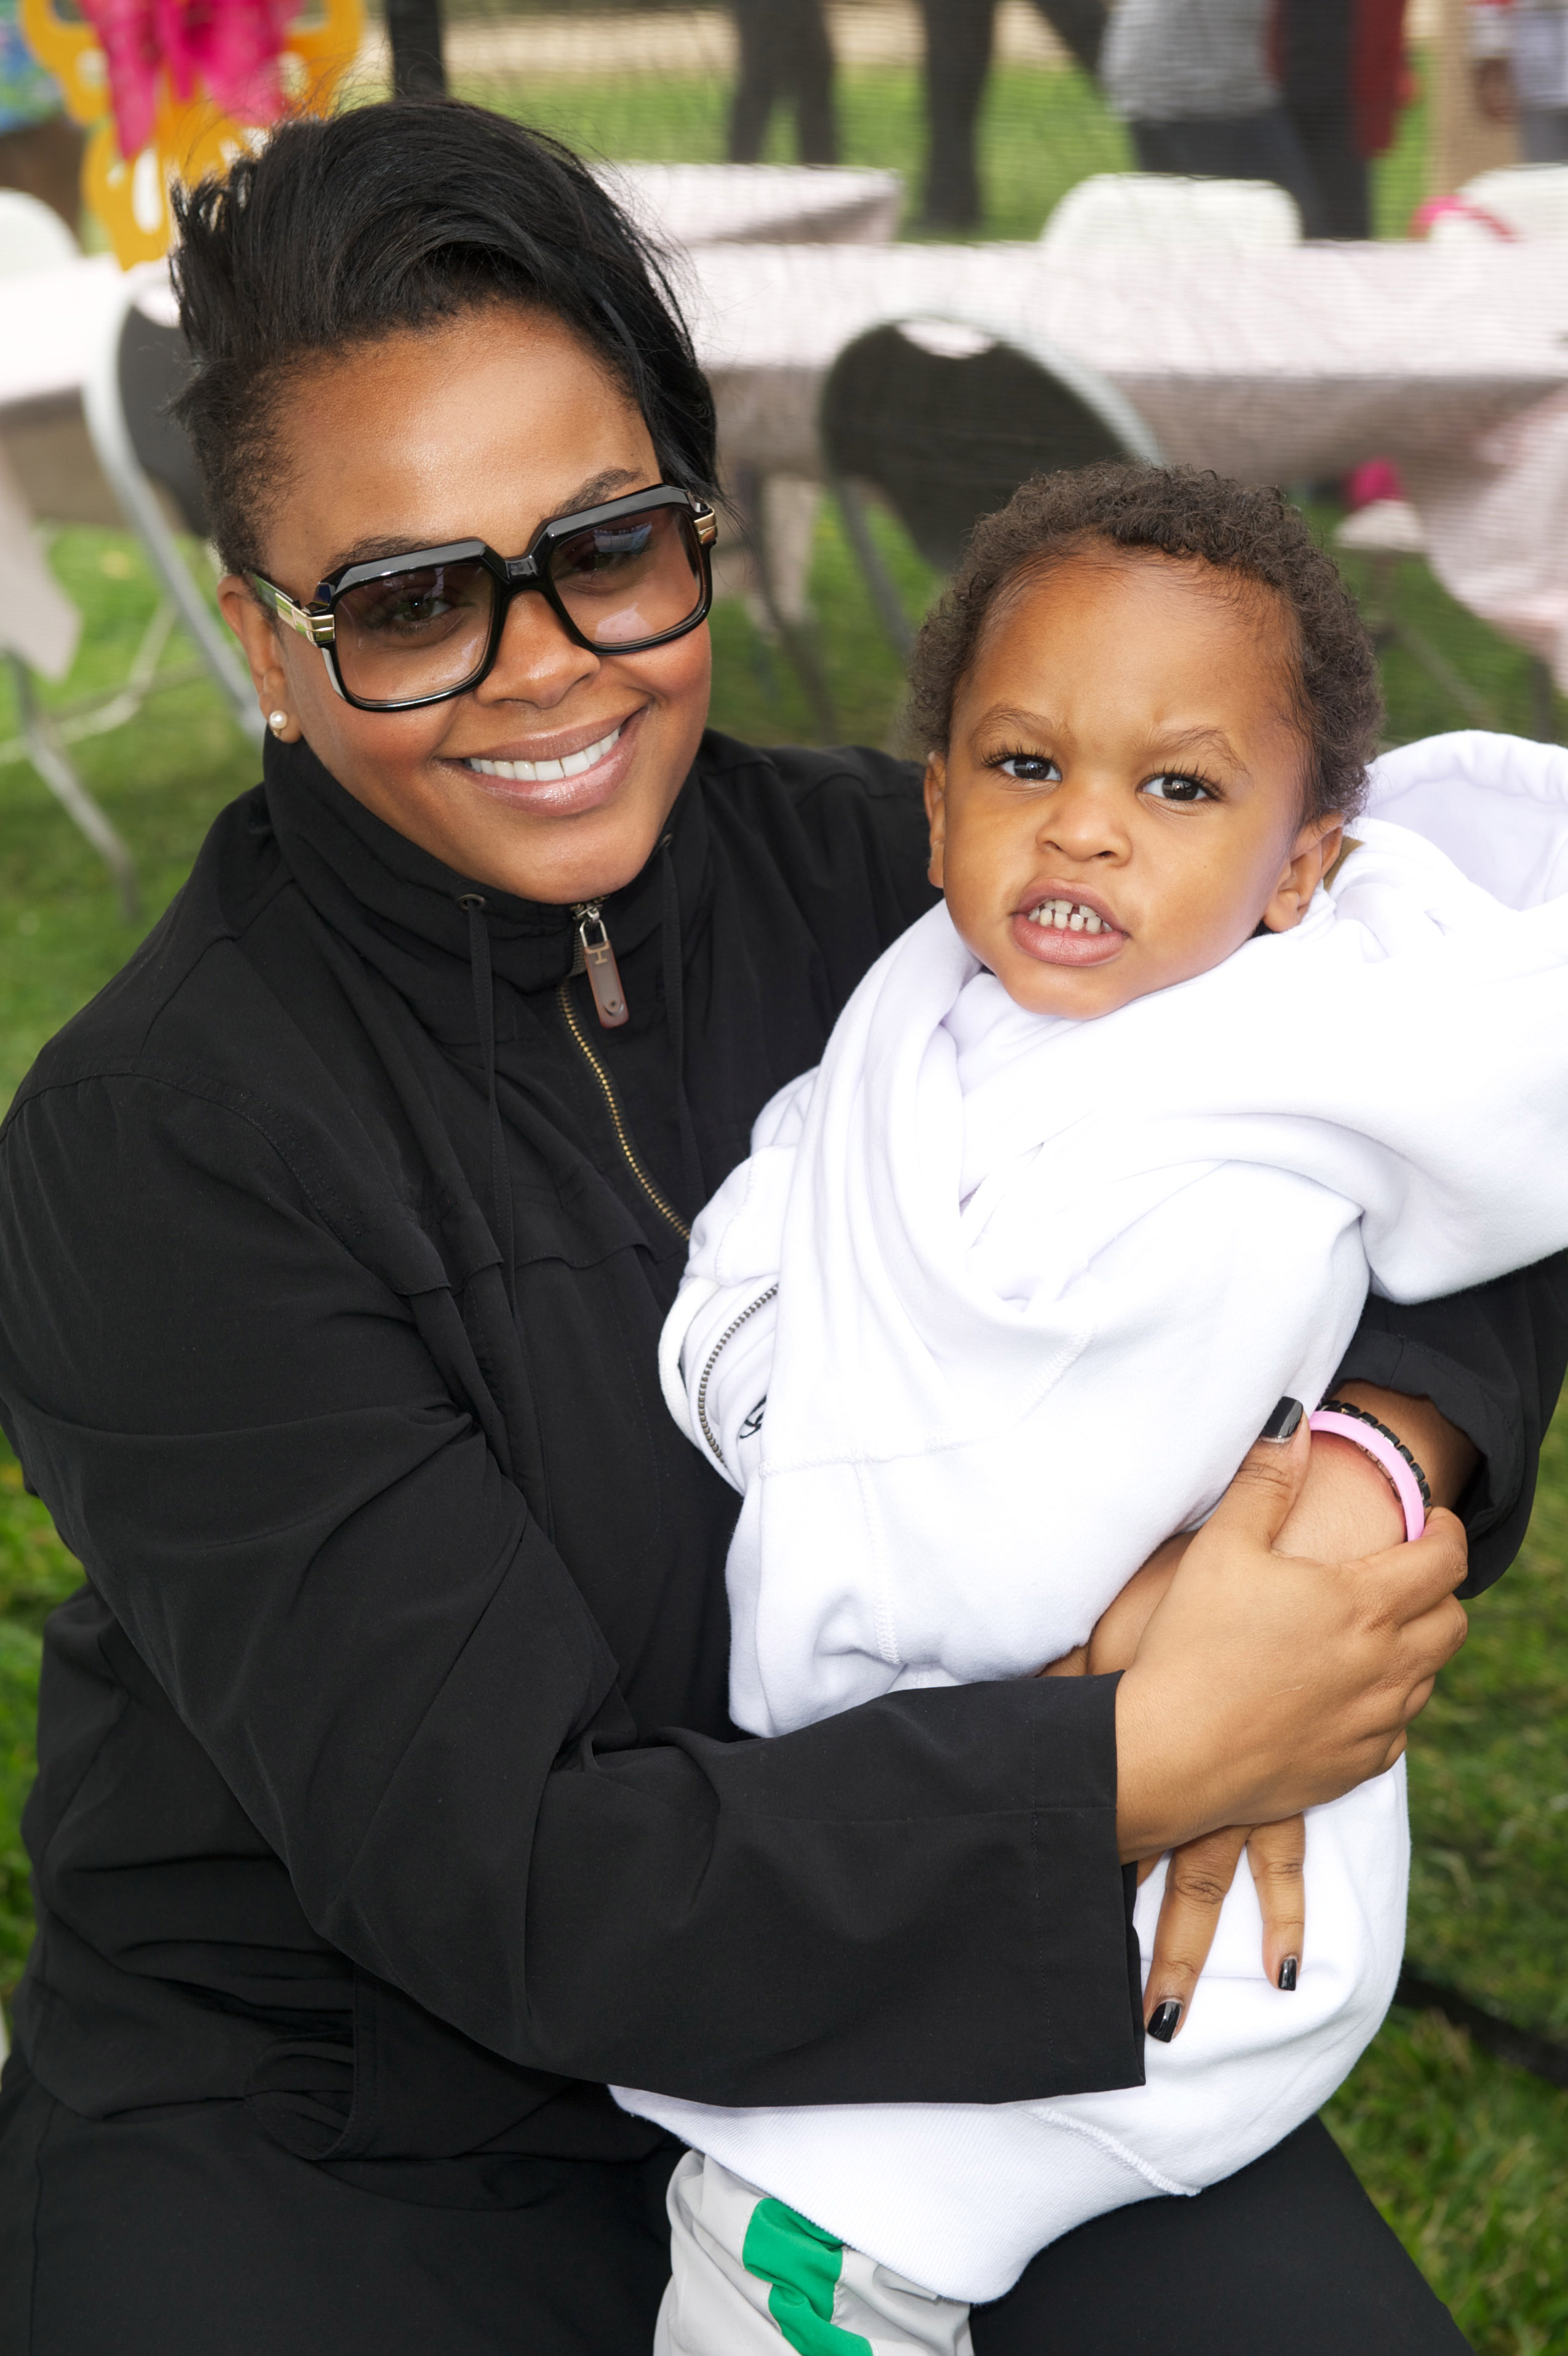 Jill Scott appears with her son Jett Hamilton Roberts at the 6th Annual Brittiana "Smile For Life" Run/Walk at Kenneth Hahn Park & Trails on May 14, 2011, in Los Angeles, California. | Source: Getty Images